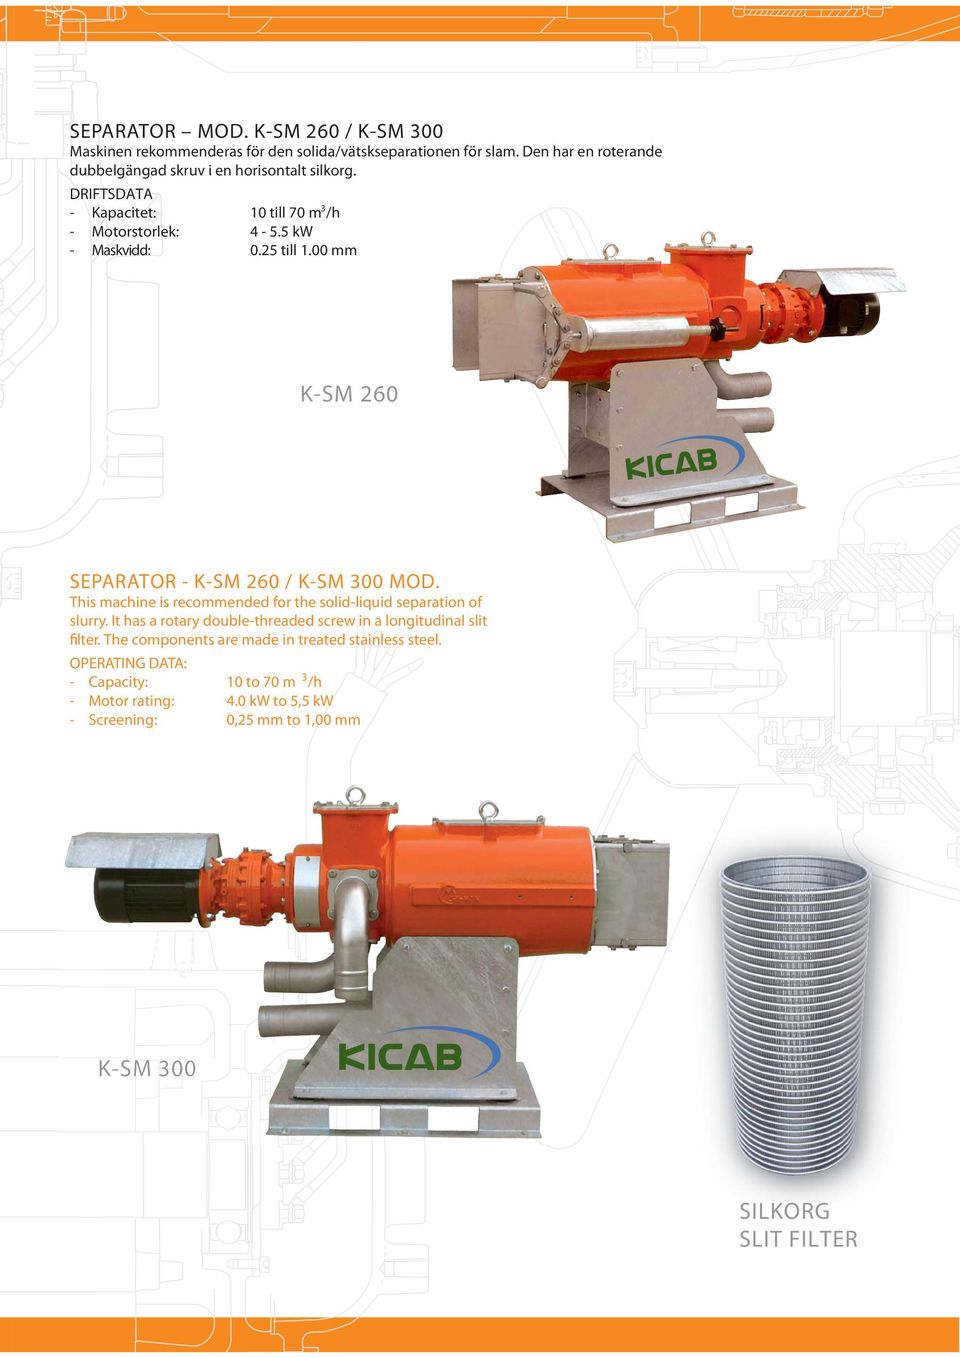 00 mm K-SM 260 SEPARATOR - K-SM 260 / K-SM 300 MOD. This machine is recommended for the solid-liquid separation of slurry.